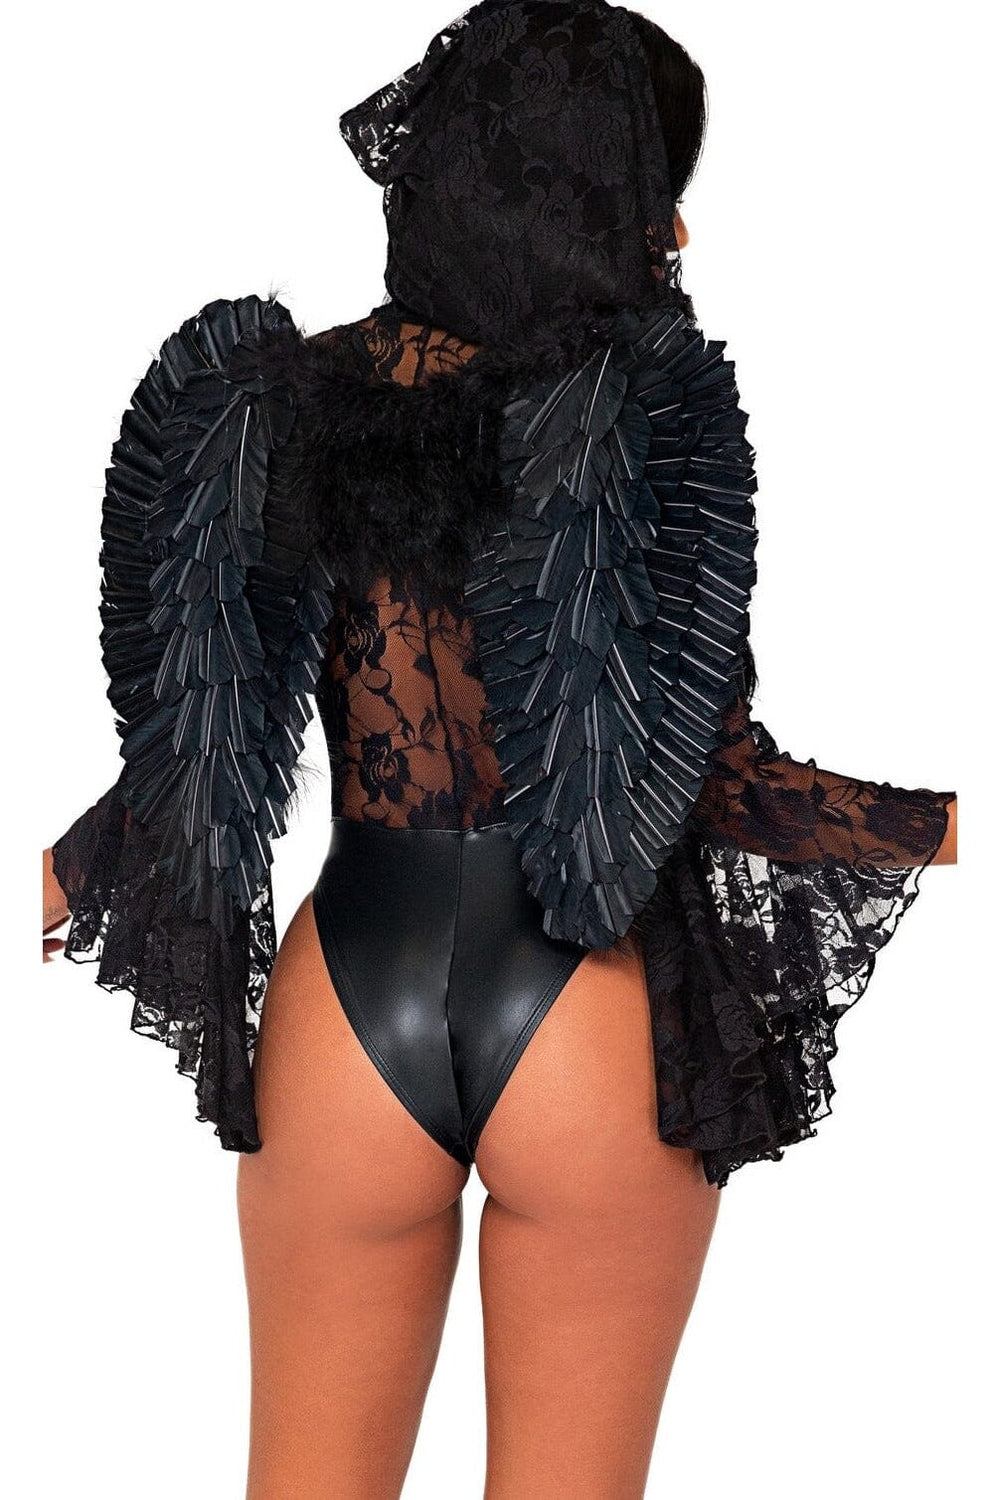 Dark Angels Lust Costume-Angel Costumes-Roma Costumes-SEXYSHOES.COM